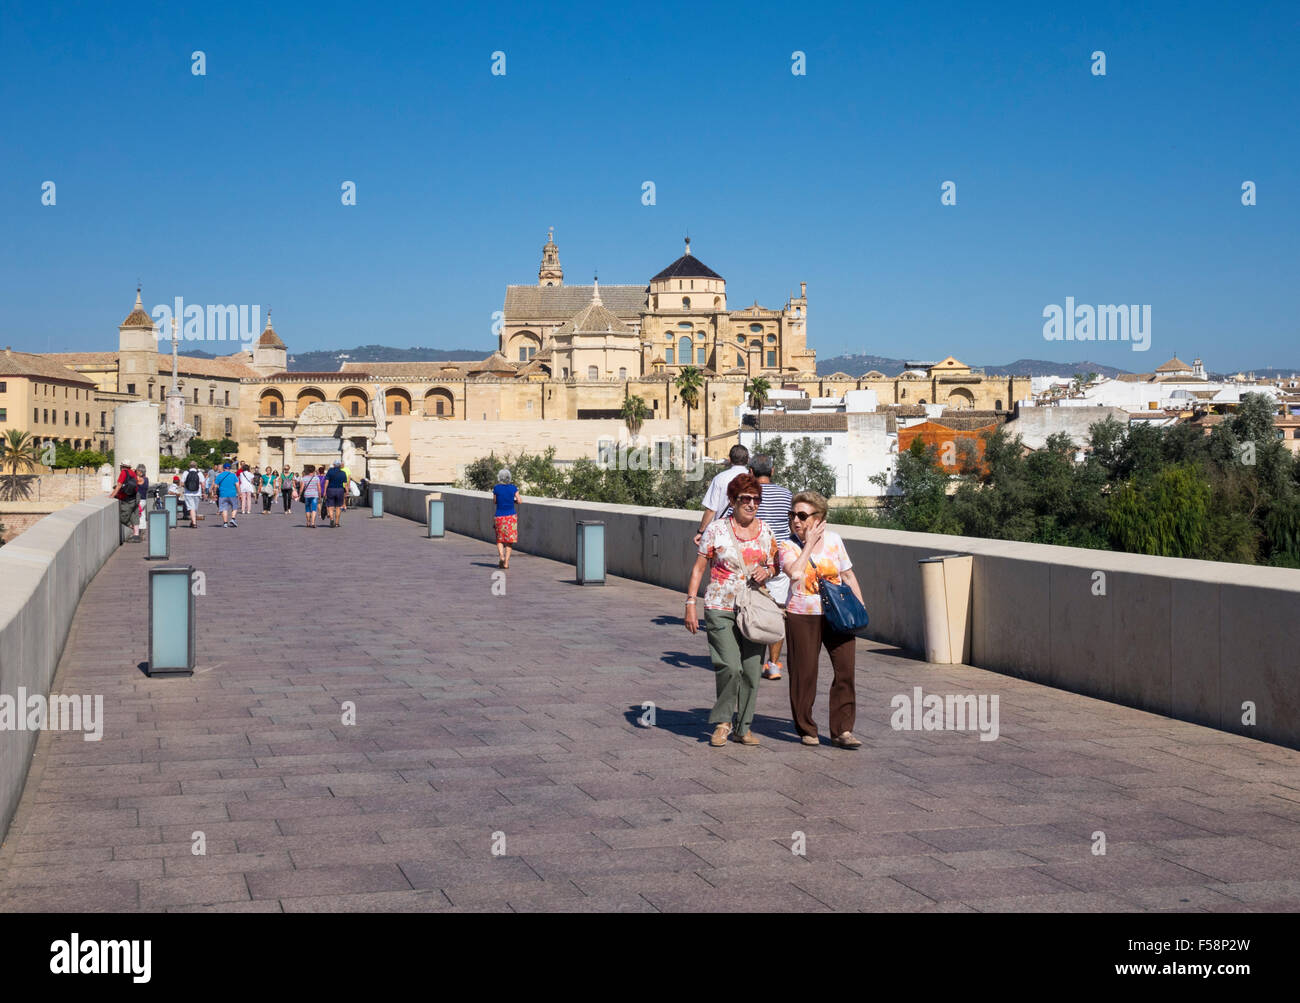 Cordoba city, Spain - Bridge leading to Mosque and Cathedral of our Lady of the Assumption in Cordoba, Andalucia, Spain Stock Photo